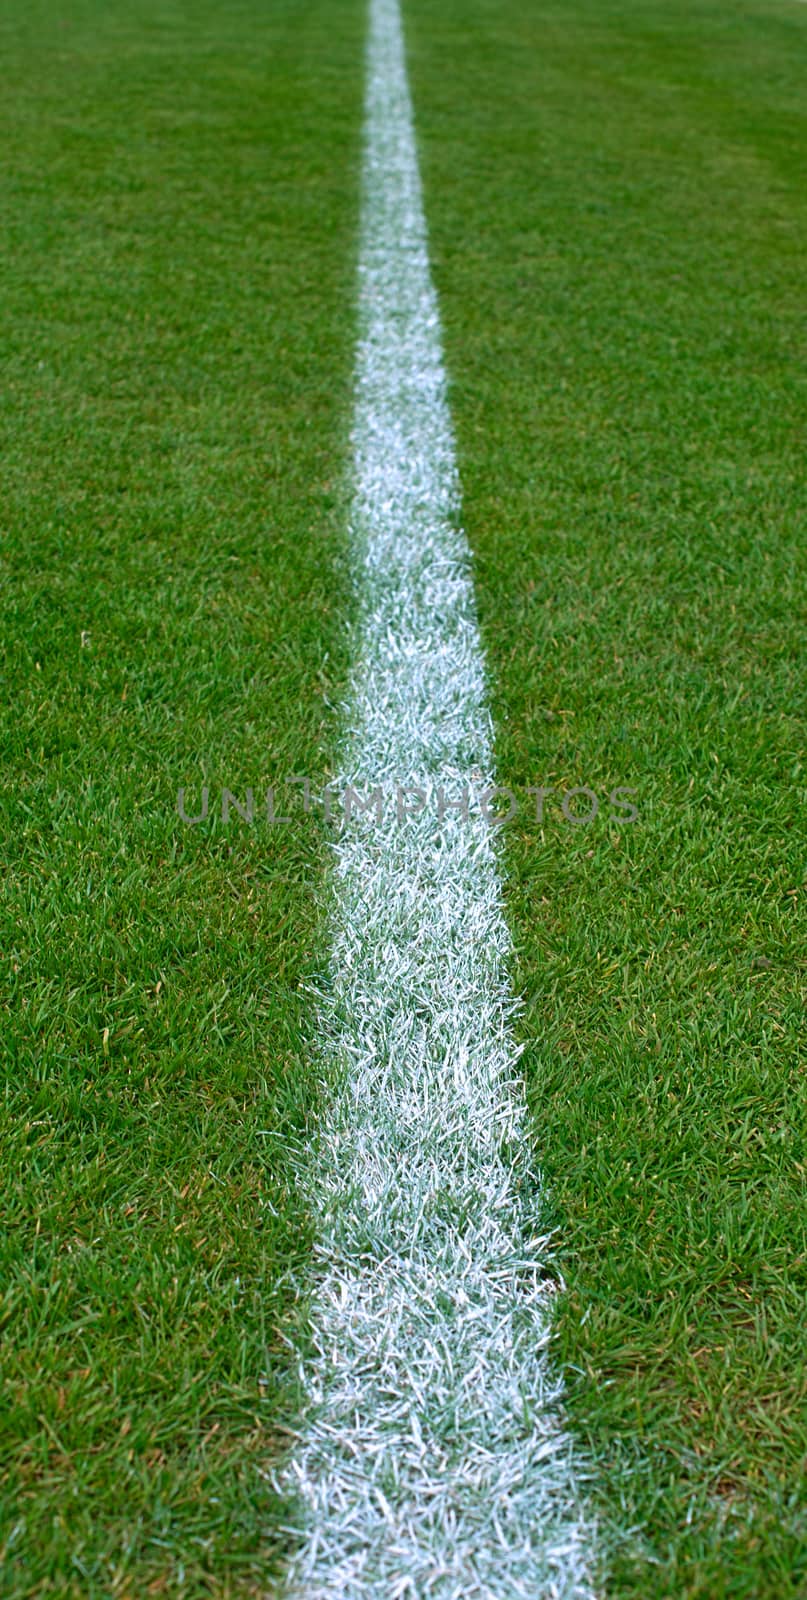 Painted white line on empty soccer grass field by sheriffkule